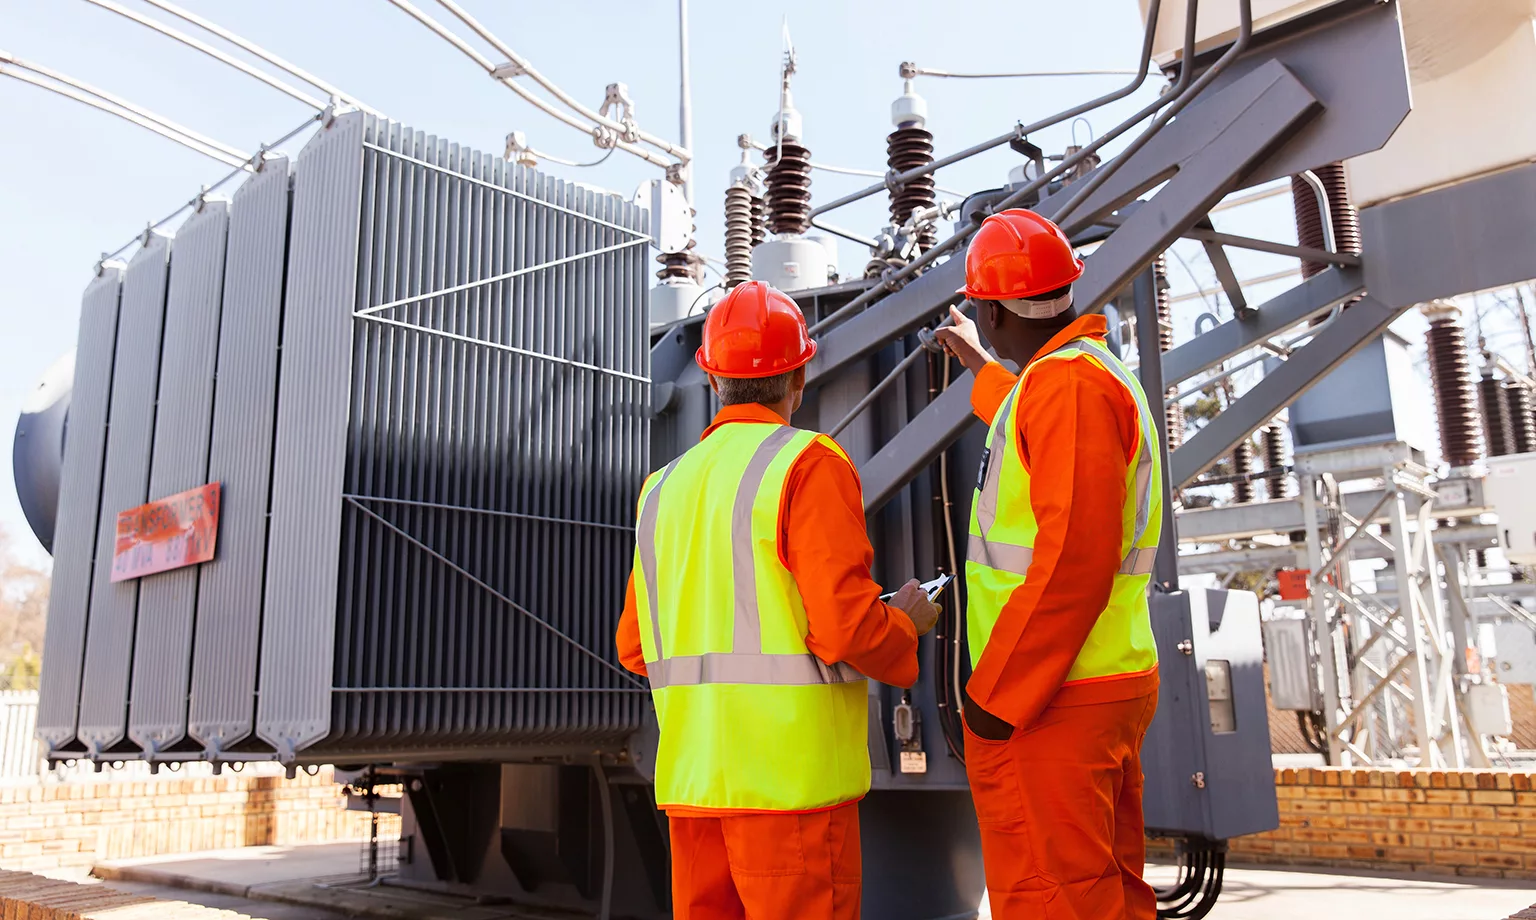 electricians standing next to a transformer